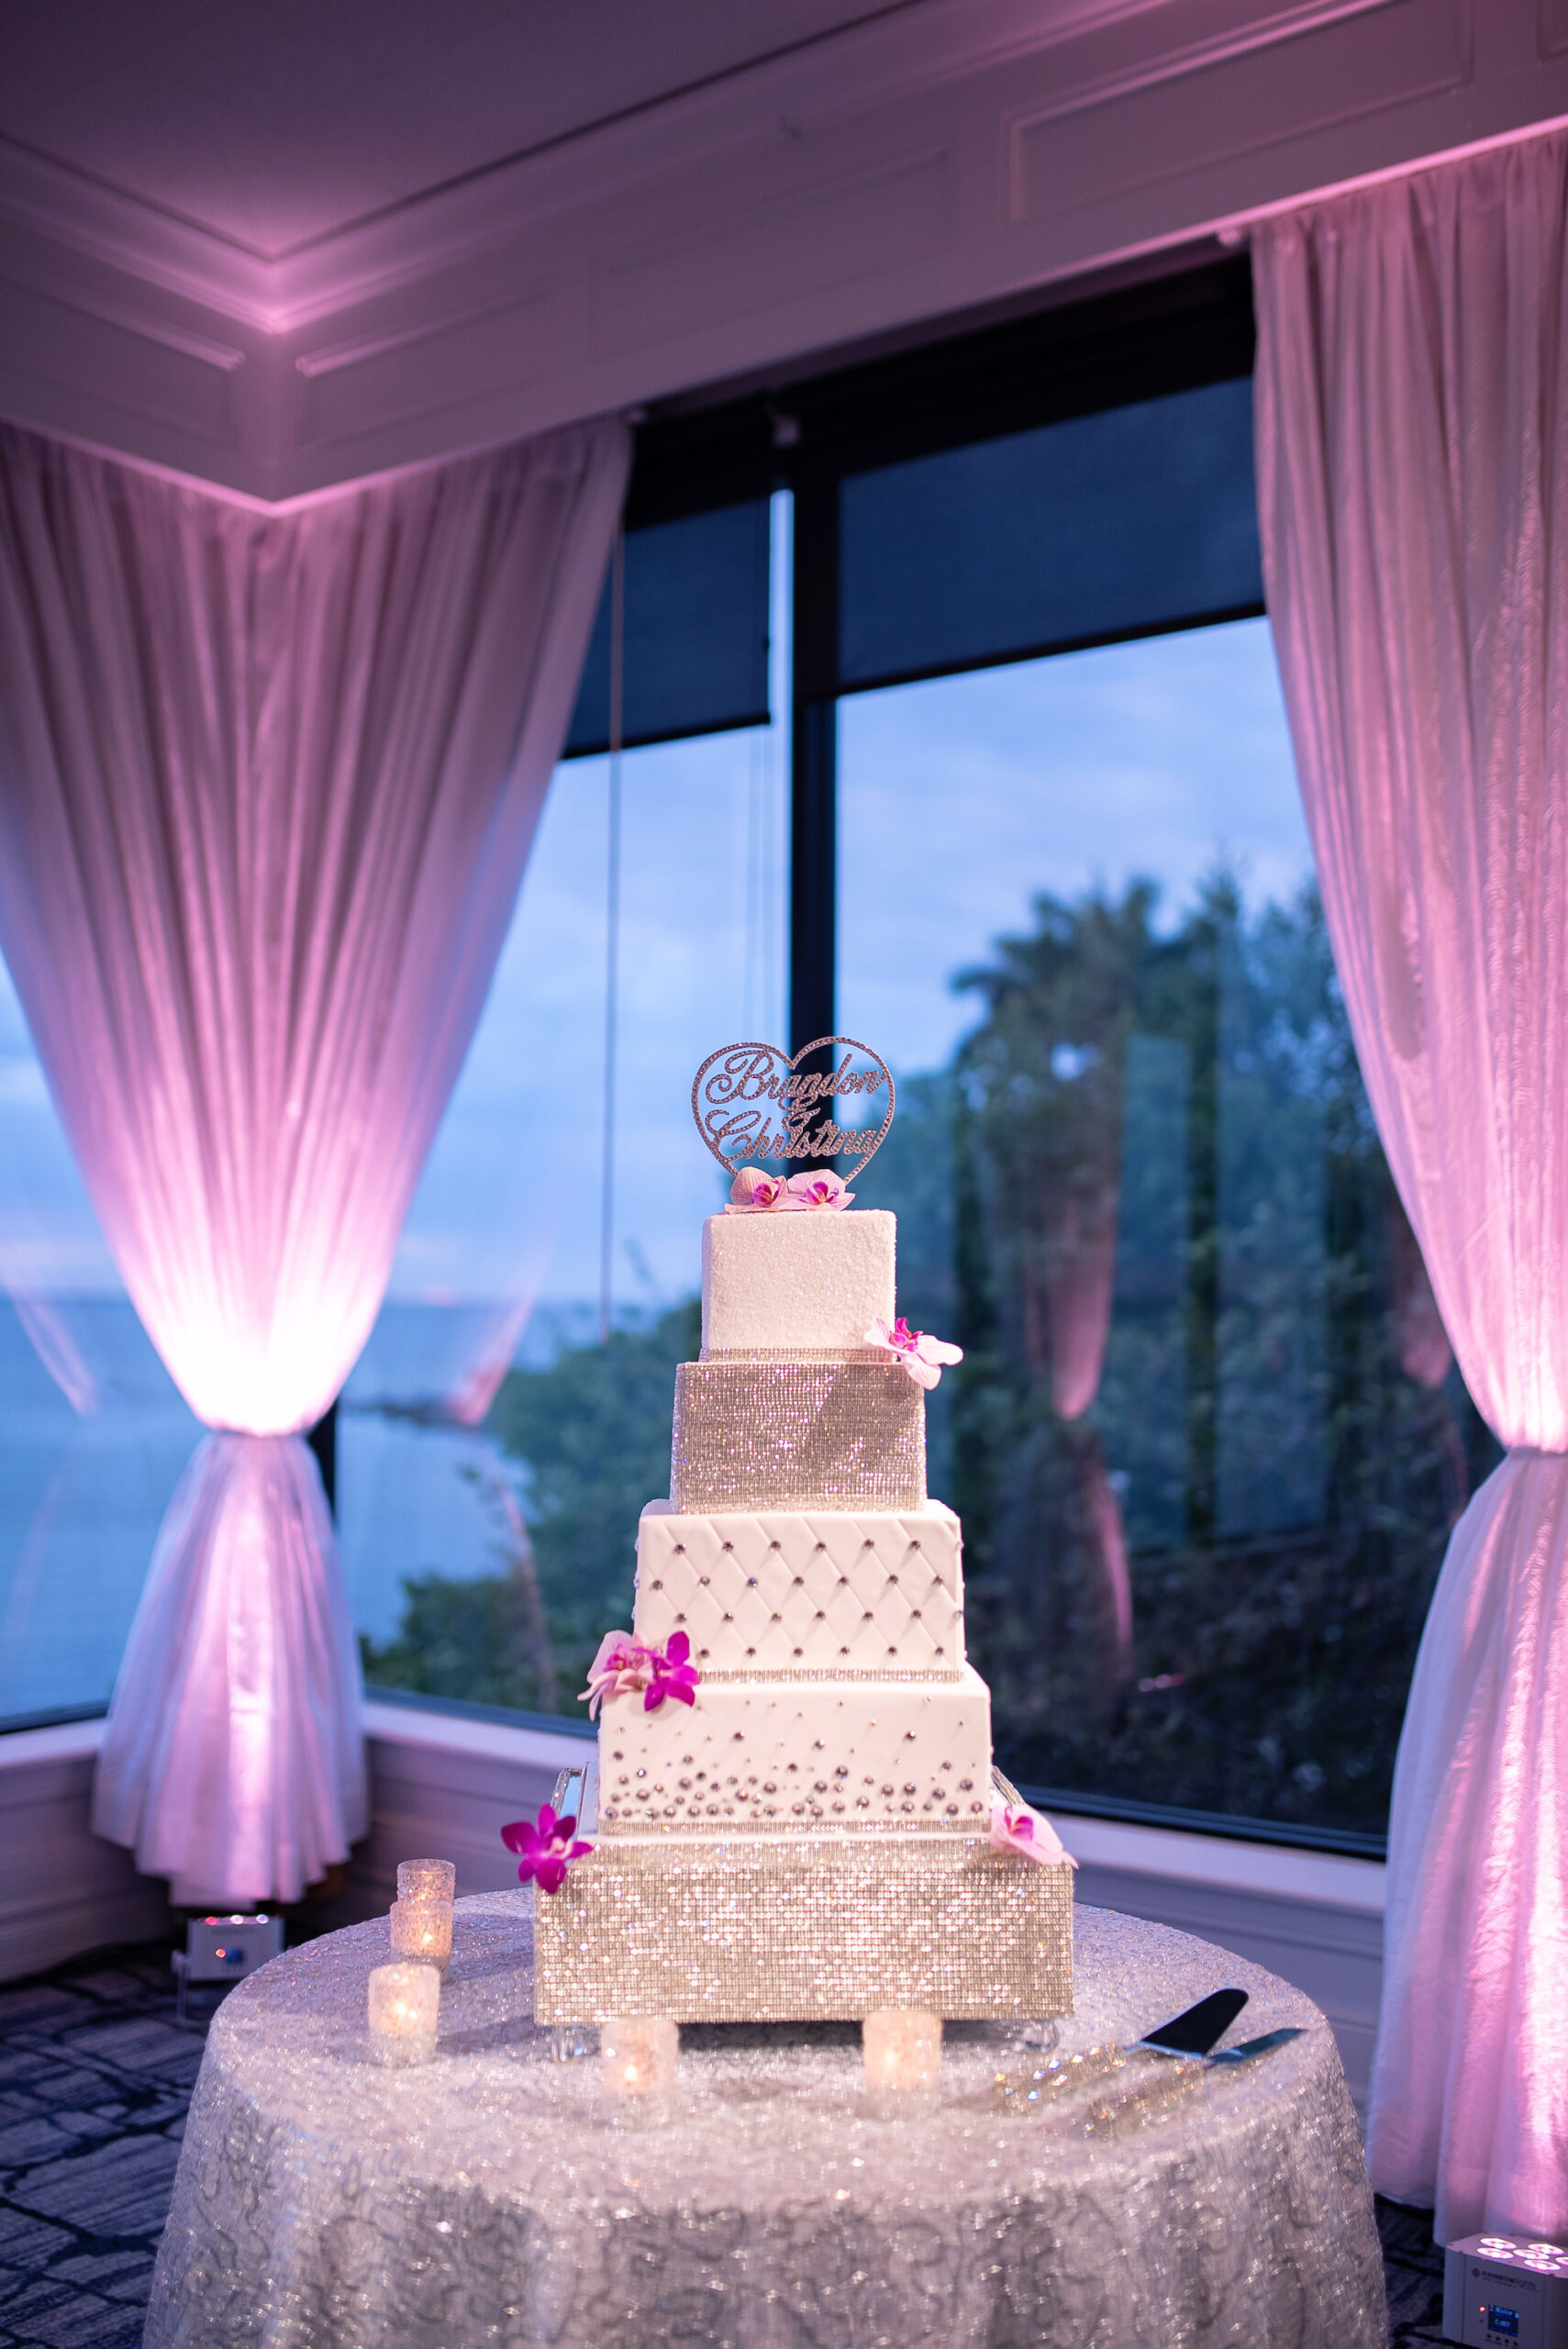 Five Tier White Wedding Cake with Silver Detailing and Pink Flowers | Tampa Wedding Cake The Artistic Whisk